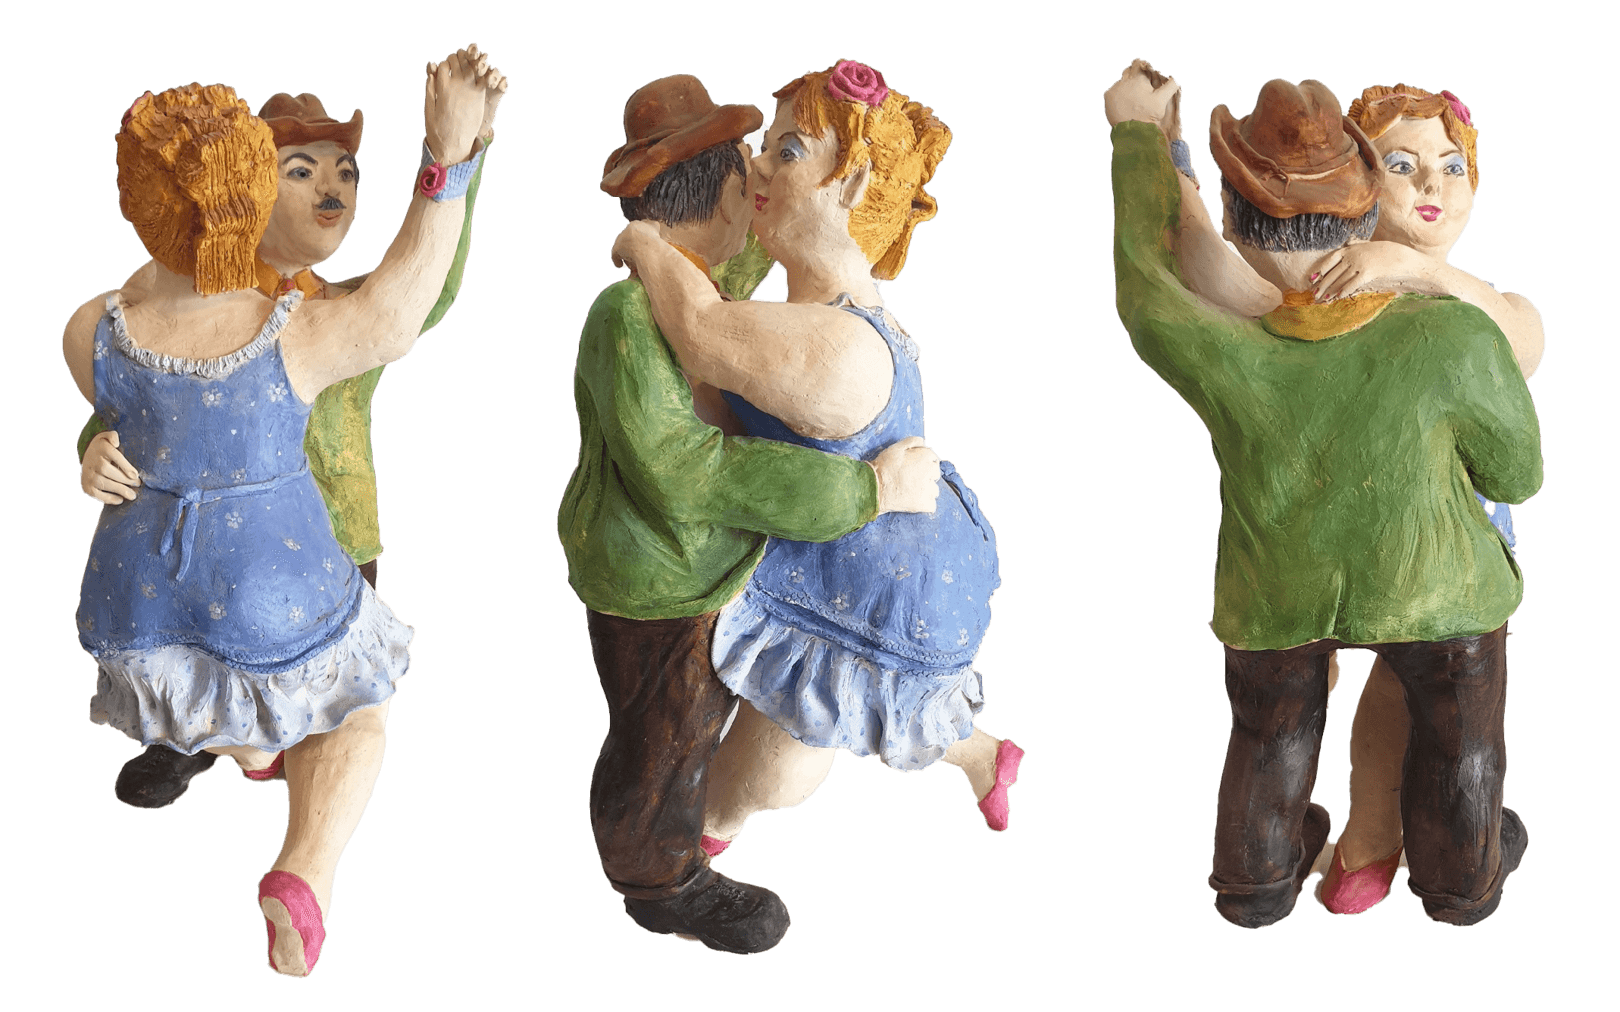 Vintage dancing man and woman Clay Sculpture